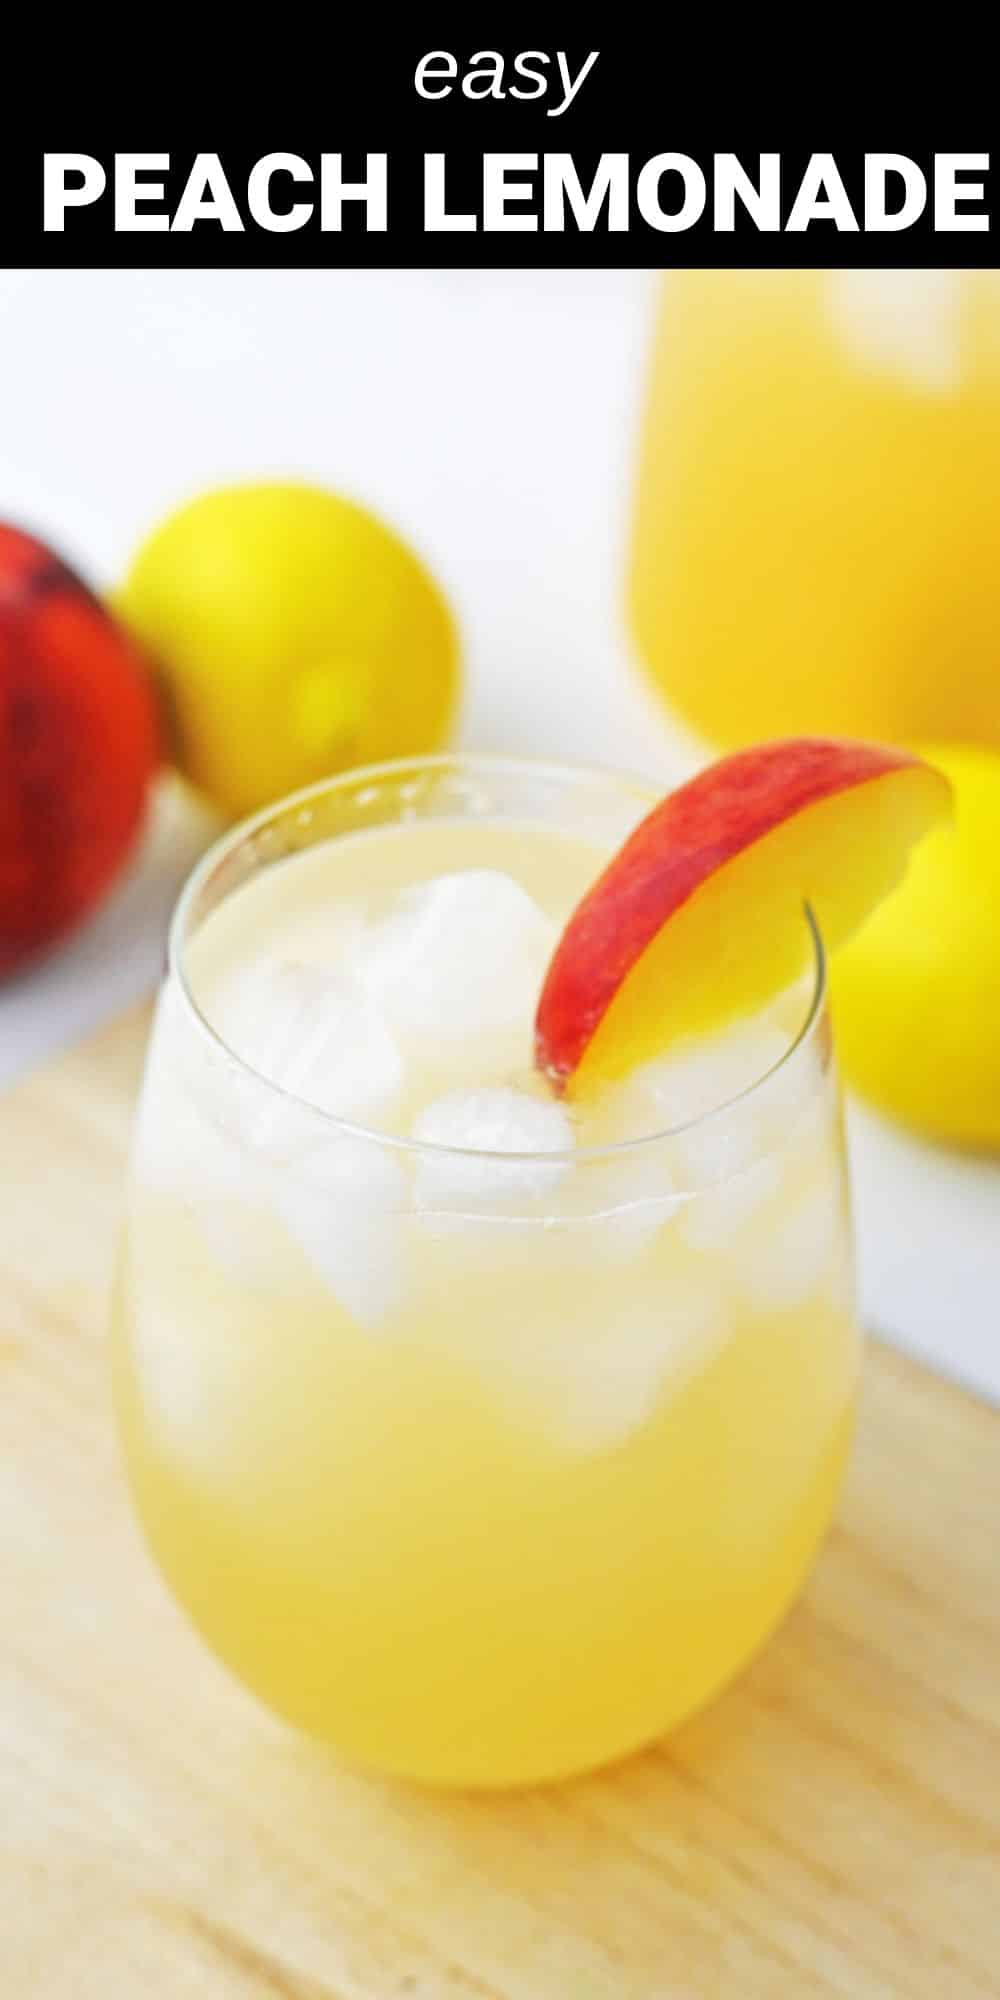 The cool and refreshing fresh Peach Lemonade is like a sip of summertime in a glass. Combining delicious, sweet peaches with fresh tangy lemon juice, it's the perfect drink to cool you off on a hot day. 